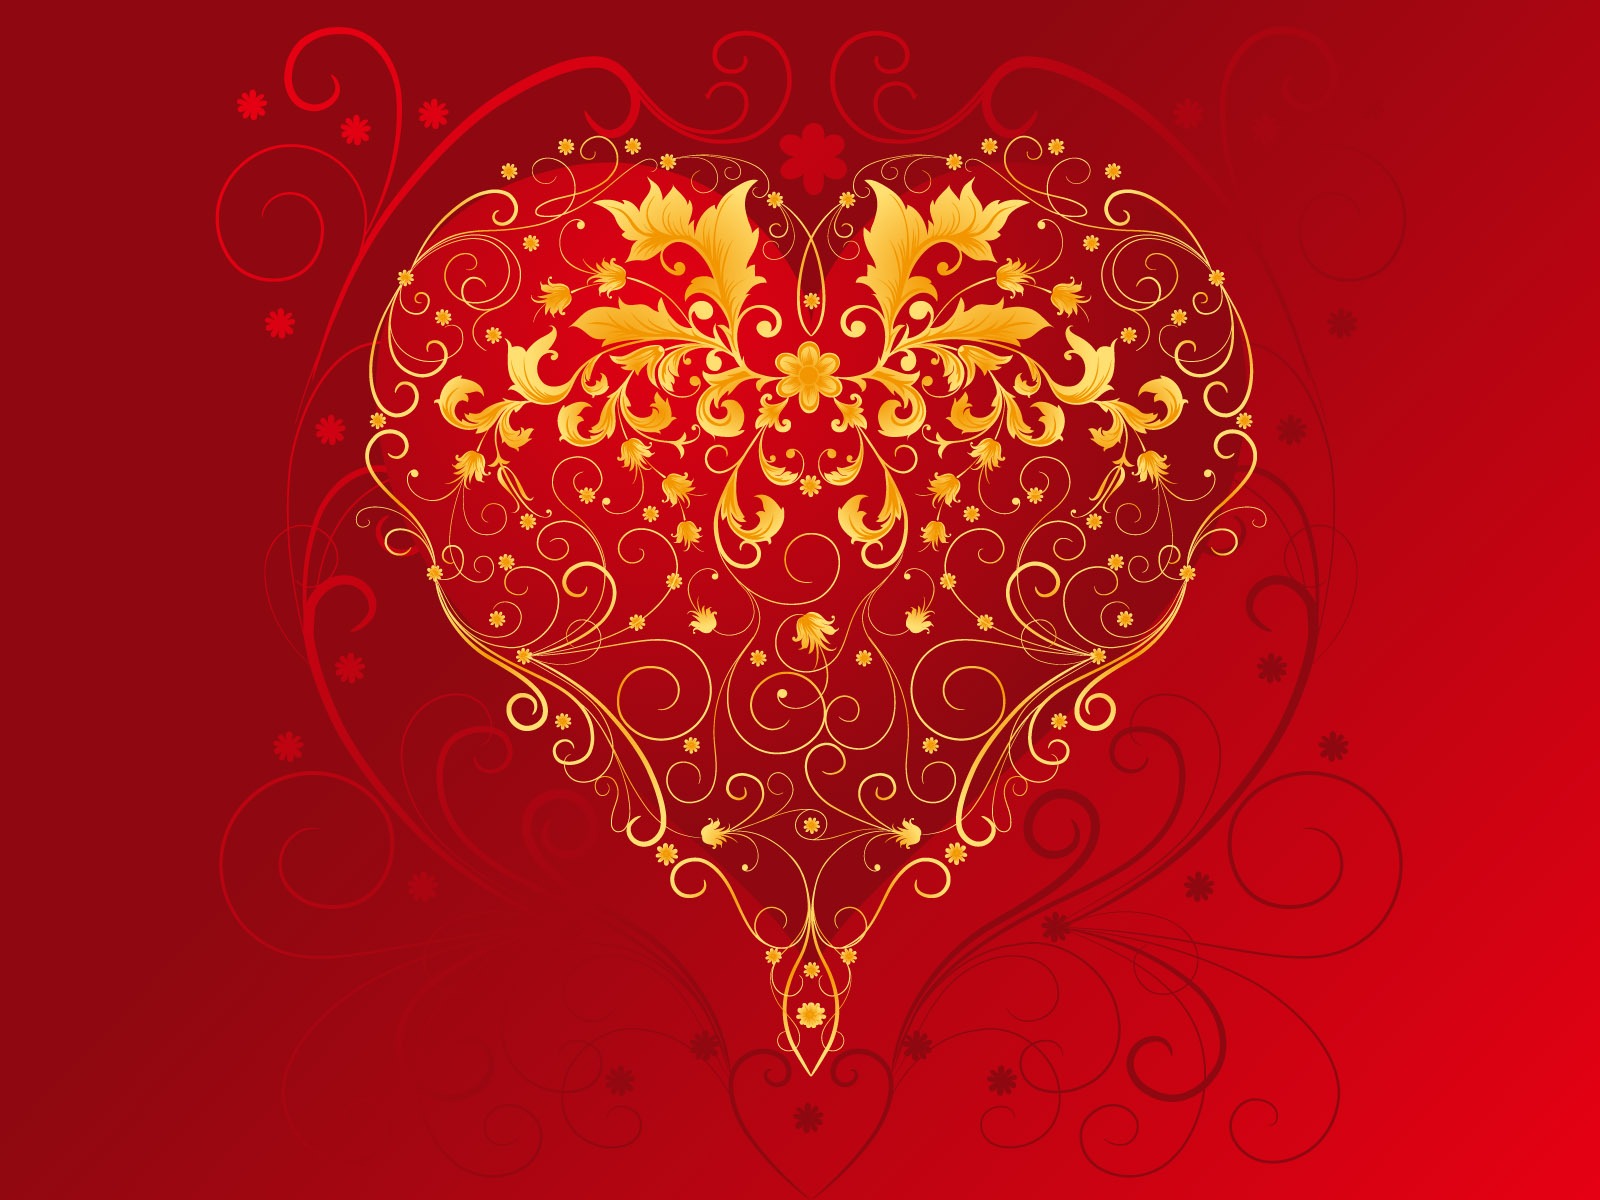 Valentine's Day Theme Wallpapers (6) #18 - 1600x1200